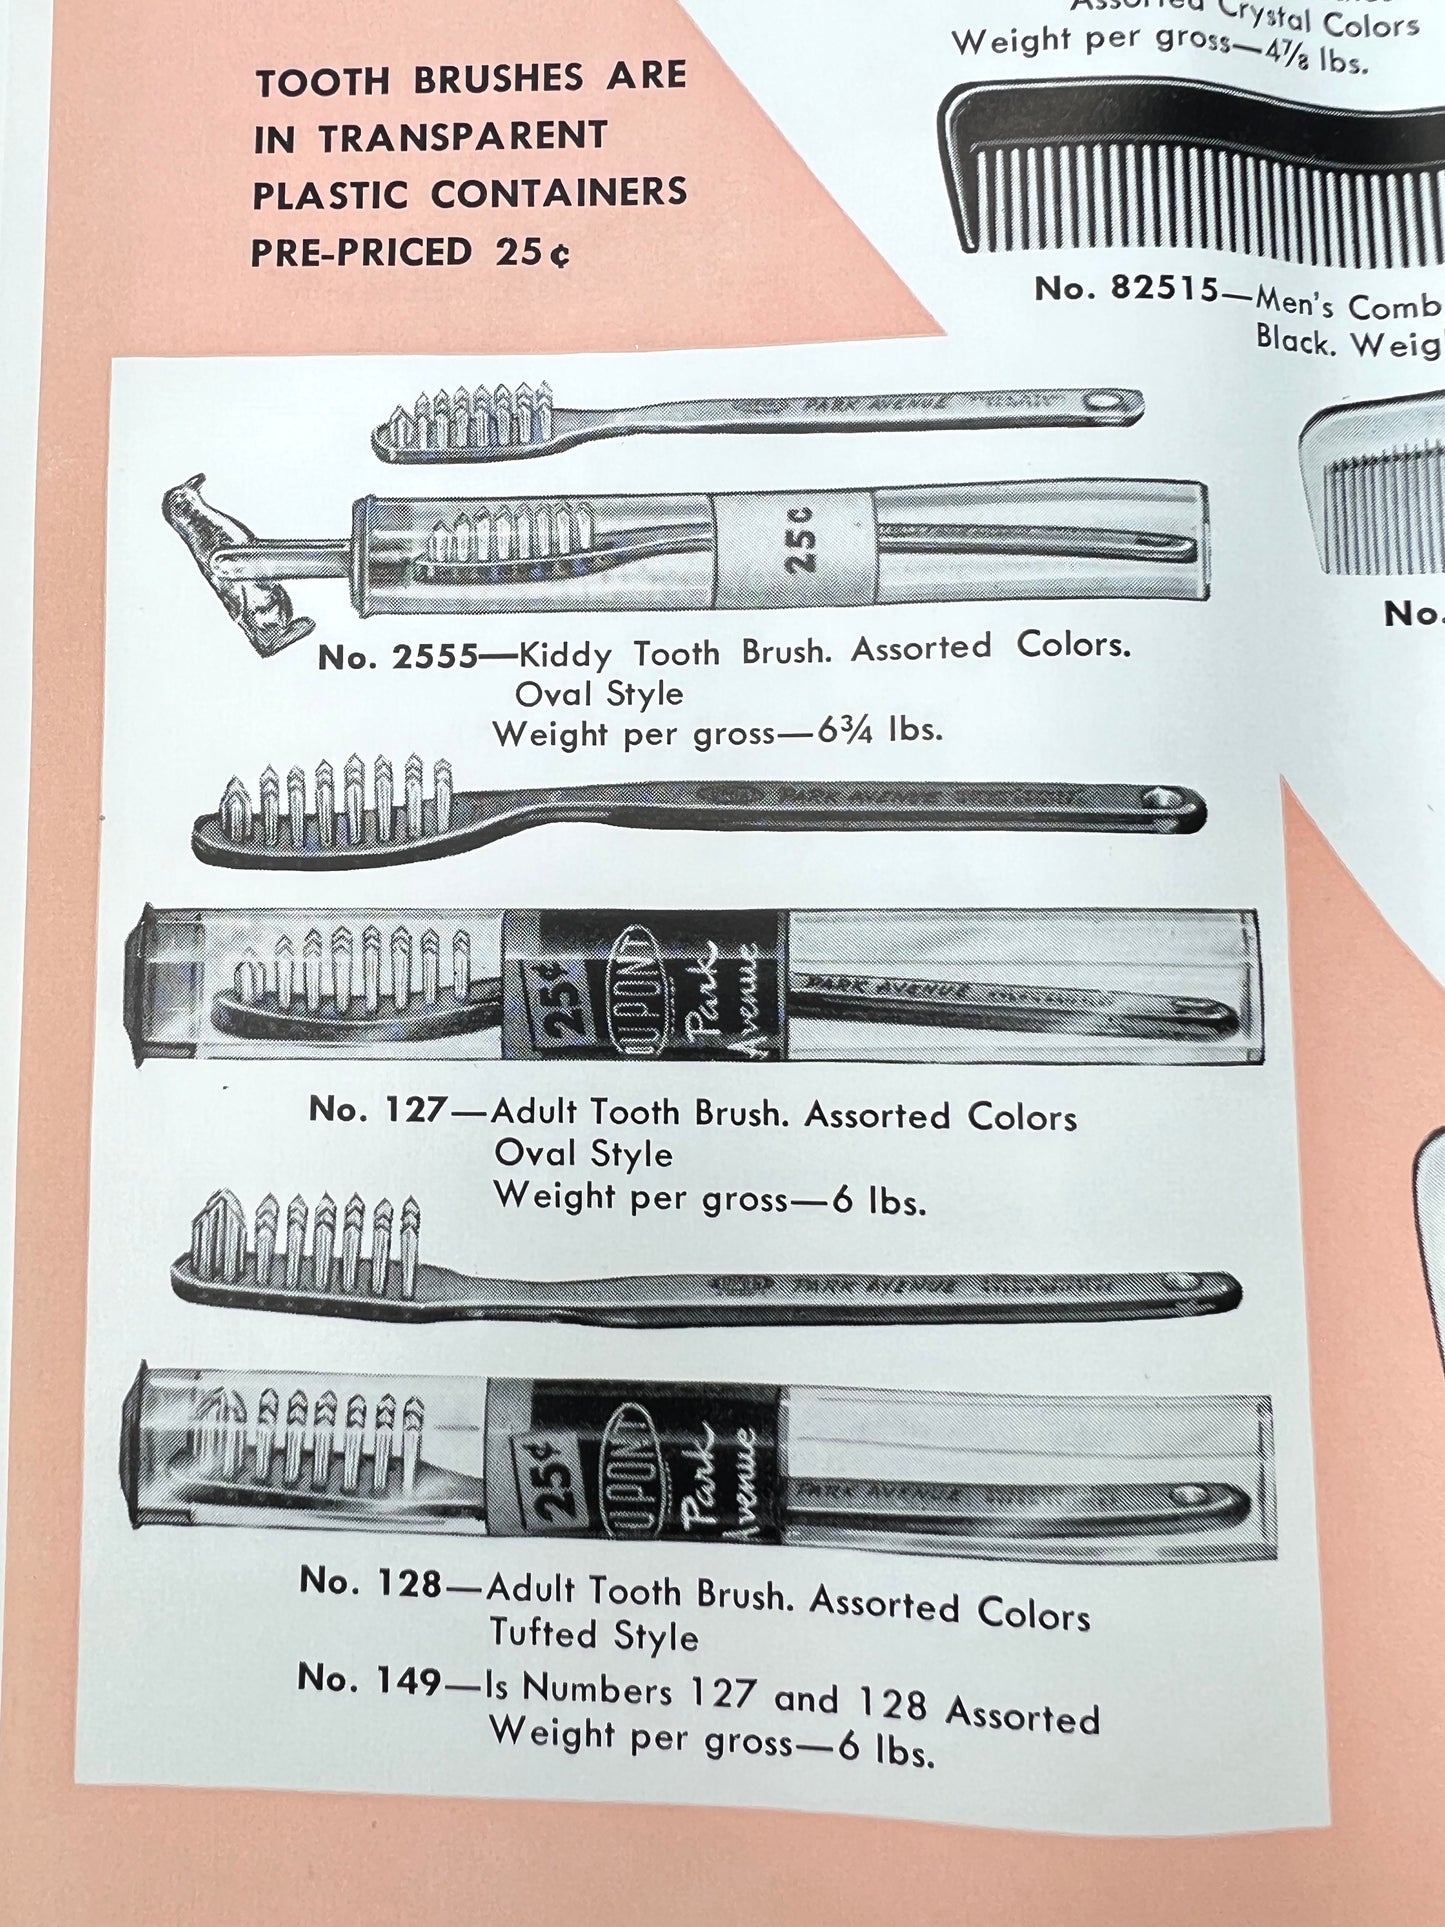 Fascinating 1956 DuPont New York Catalogue of All Sorts of Brushes, Combs and Toiletries